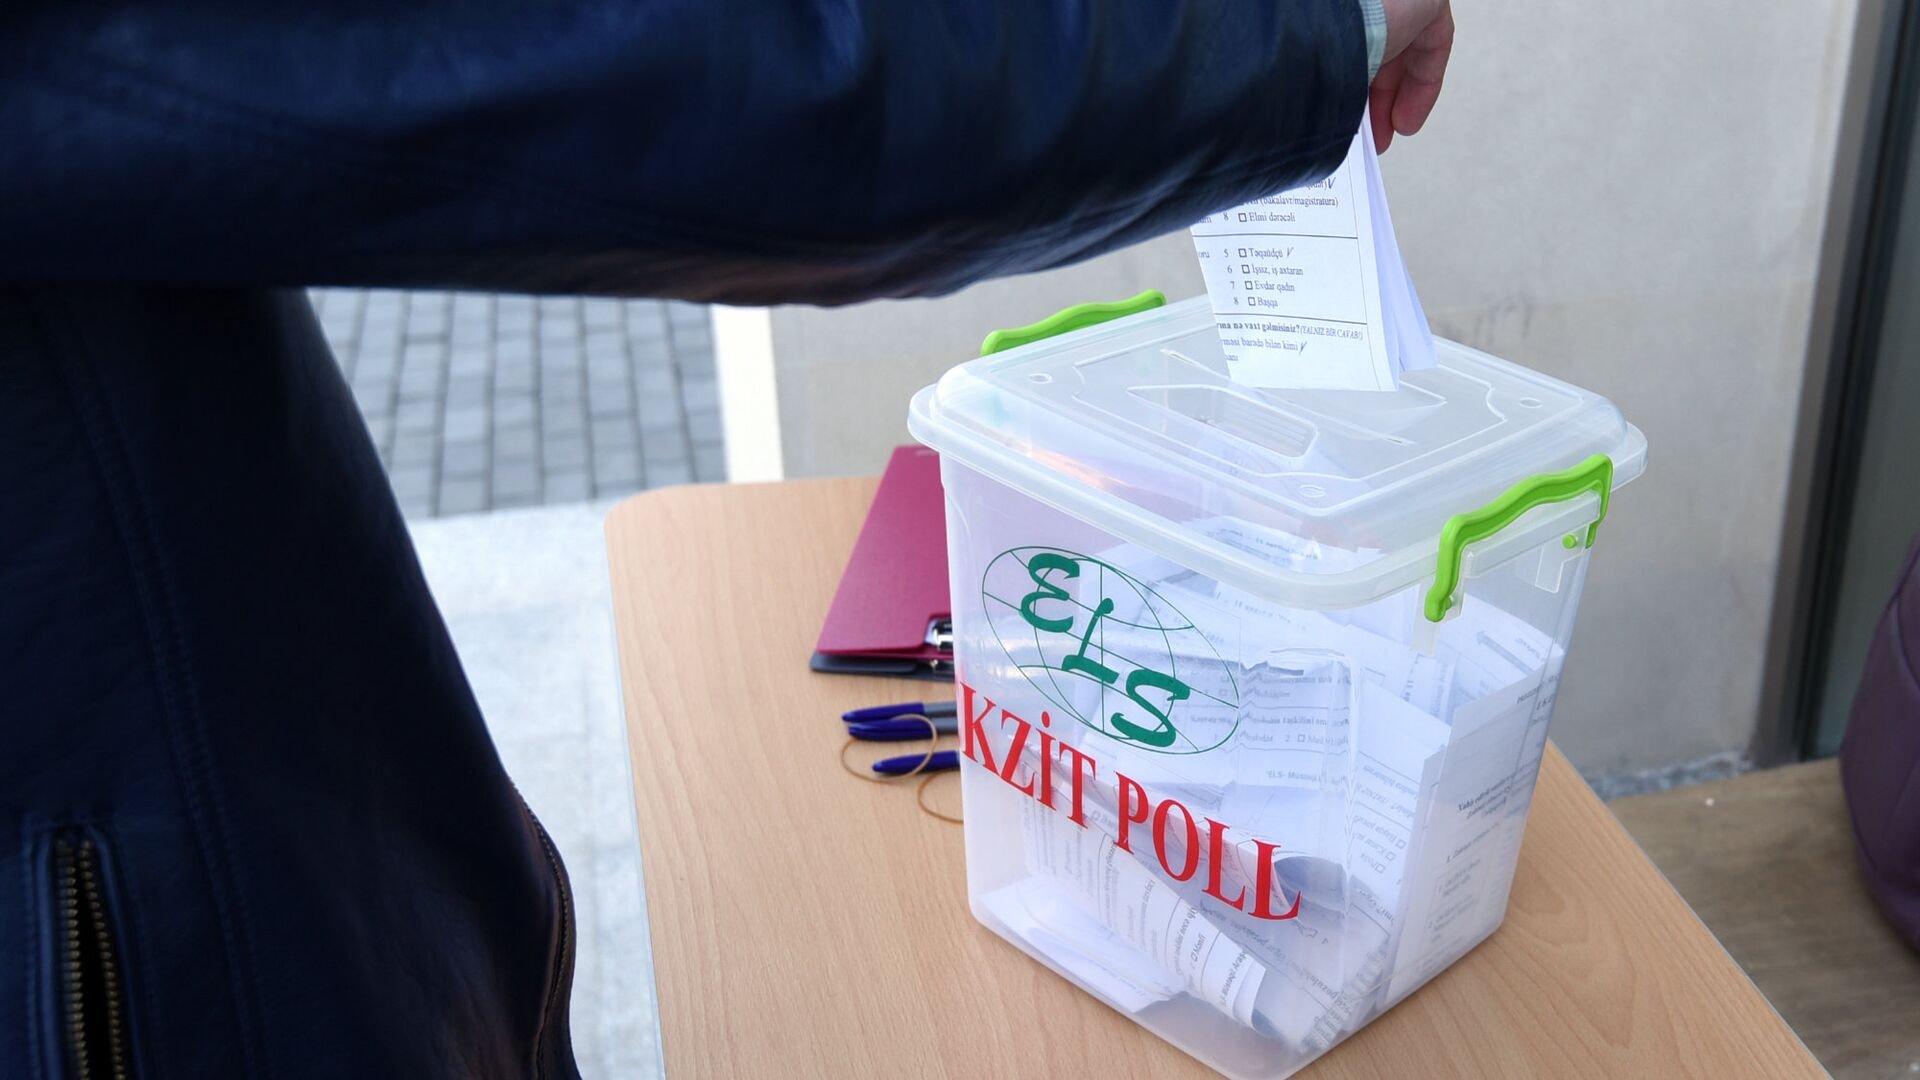 Azerbaijan counts organizations urging for exit poll at presidential election